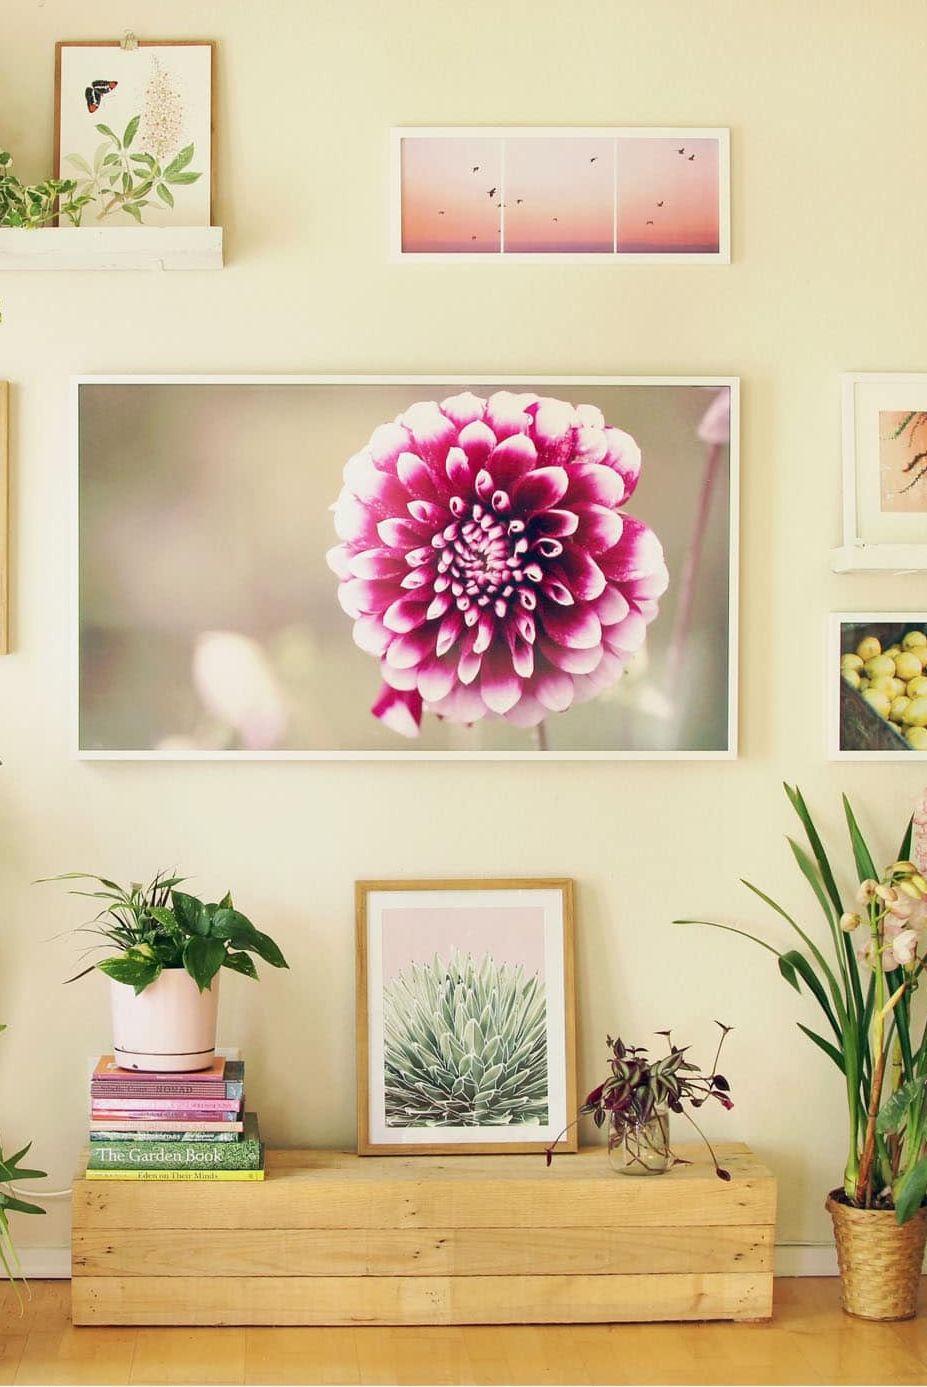 family photo wall ideas, wall with nature inspired images and greenery